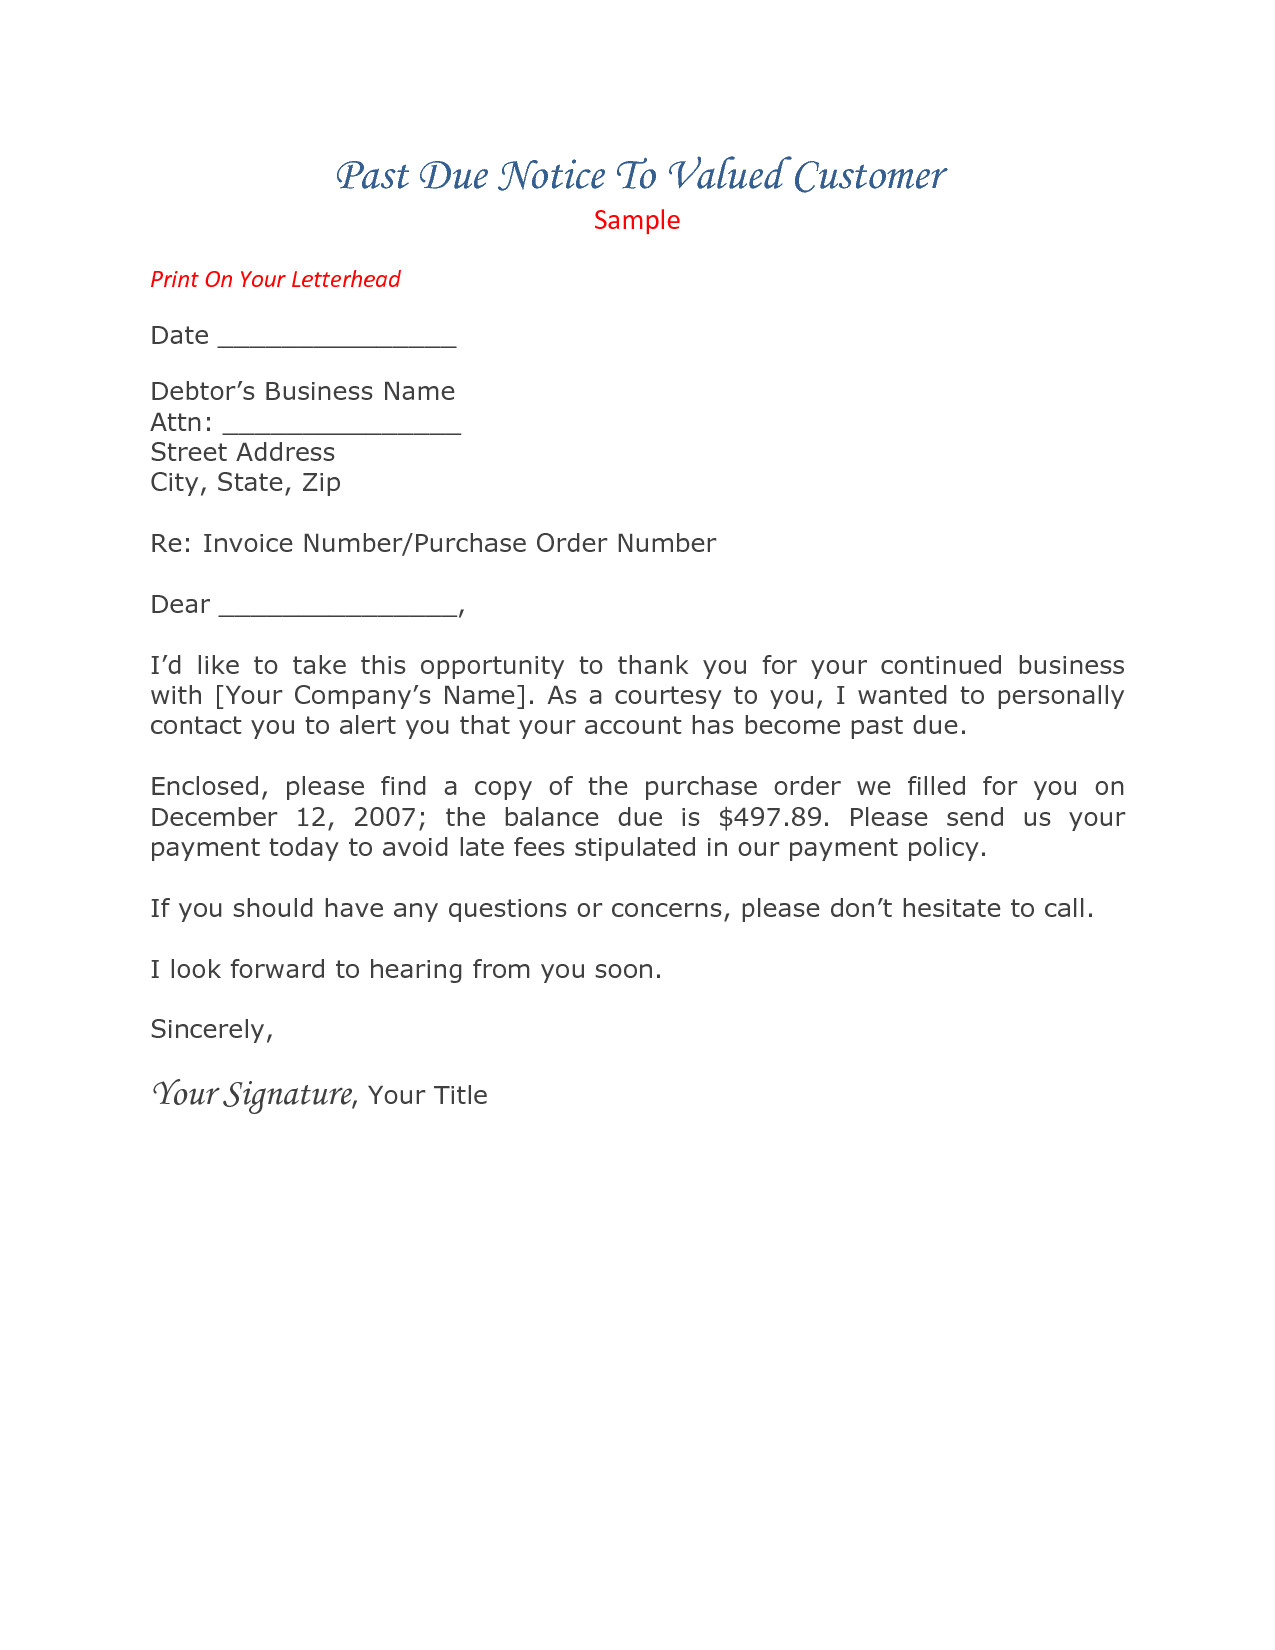 Past Due Rent Letter Template - Past Due Invoice Letter Awesome 20 New Payment Demand Letter